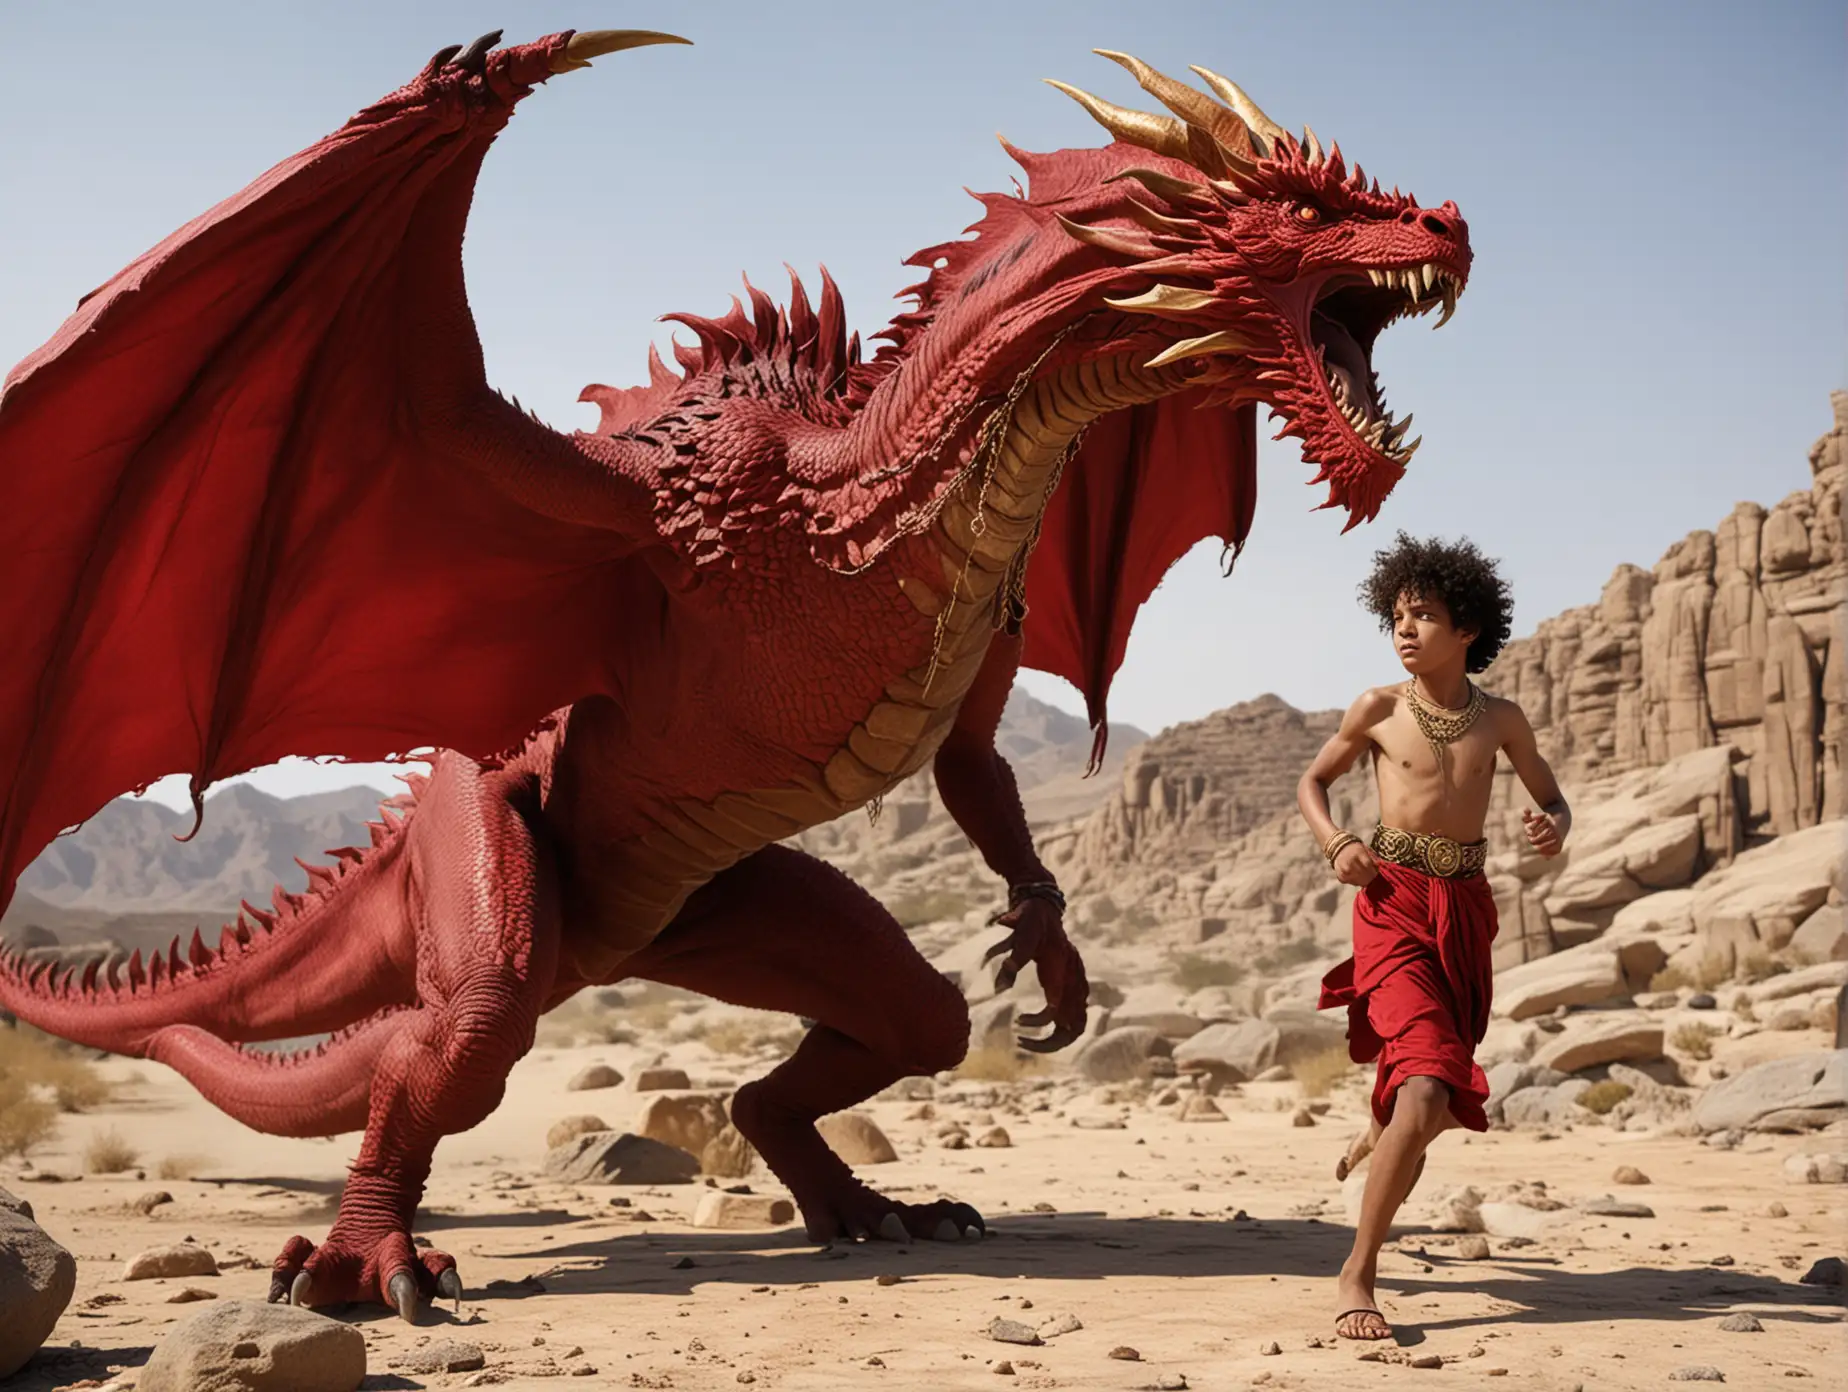 a bare-chested 15 year old boy, curly hair, black skin, wearing red cloth and gold jewelry fighting with a giant red dragon in a rocky desert